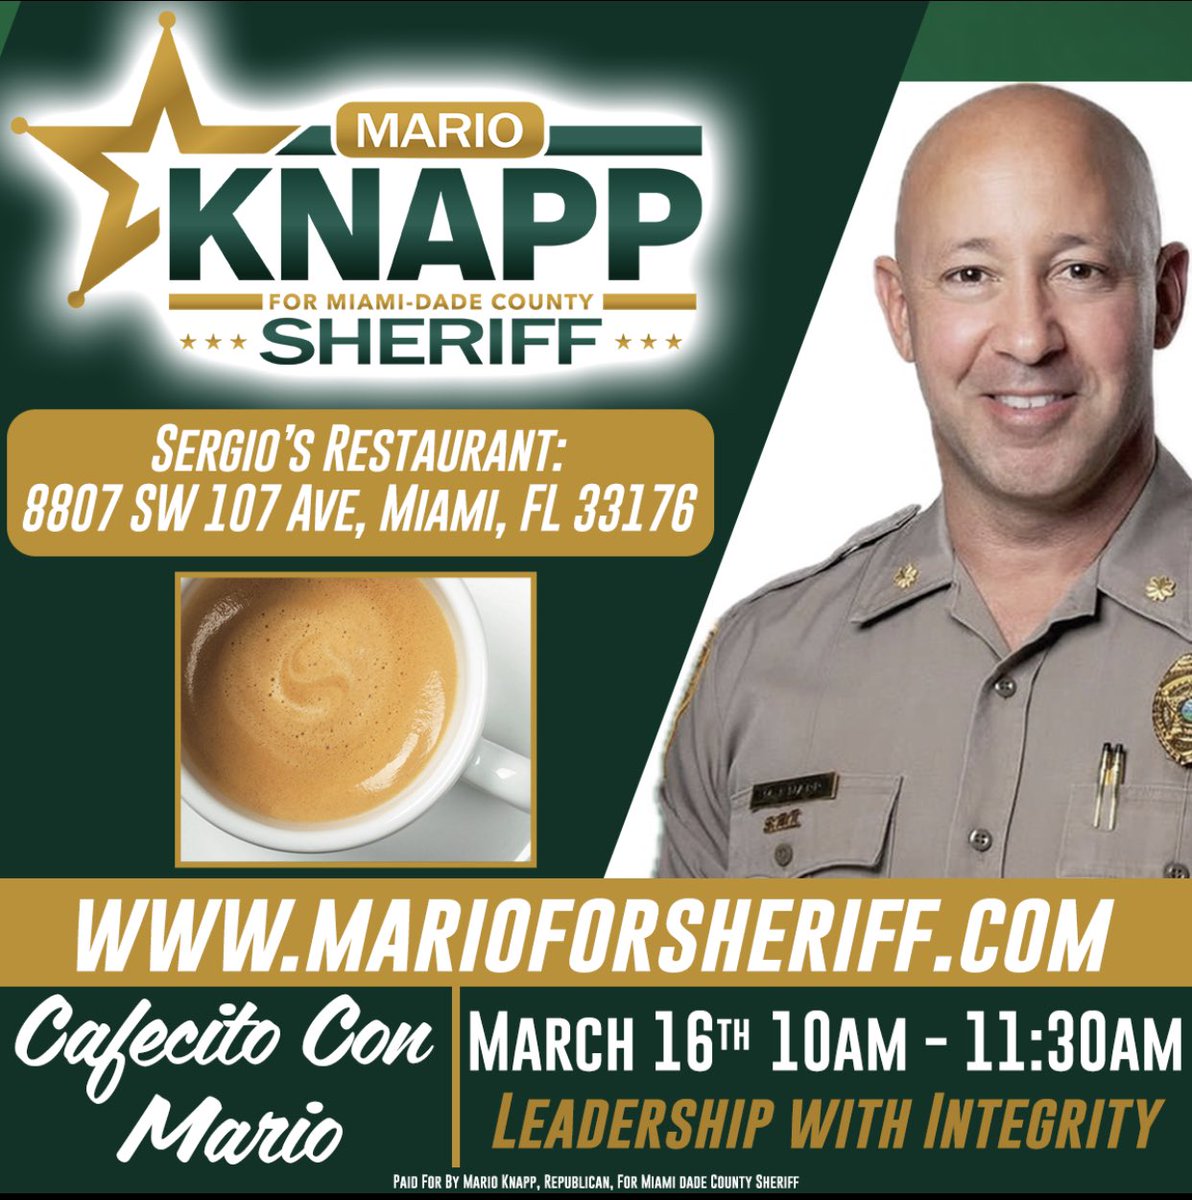 Join me for Q&A and coffee tomorrow between 10-11:30am at Sergio’s in kendall. #Miami #MDPD #MarioForSheriff